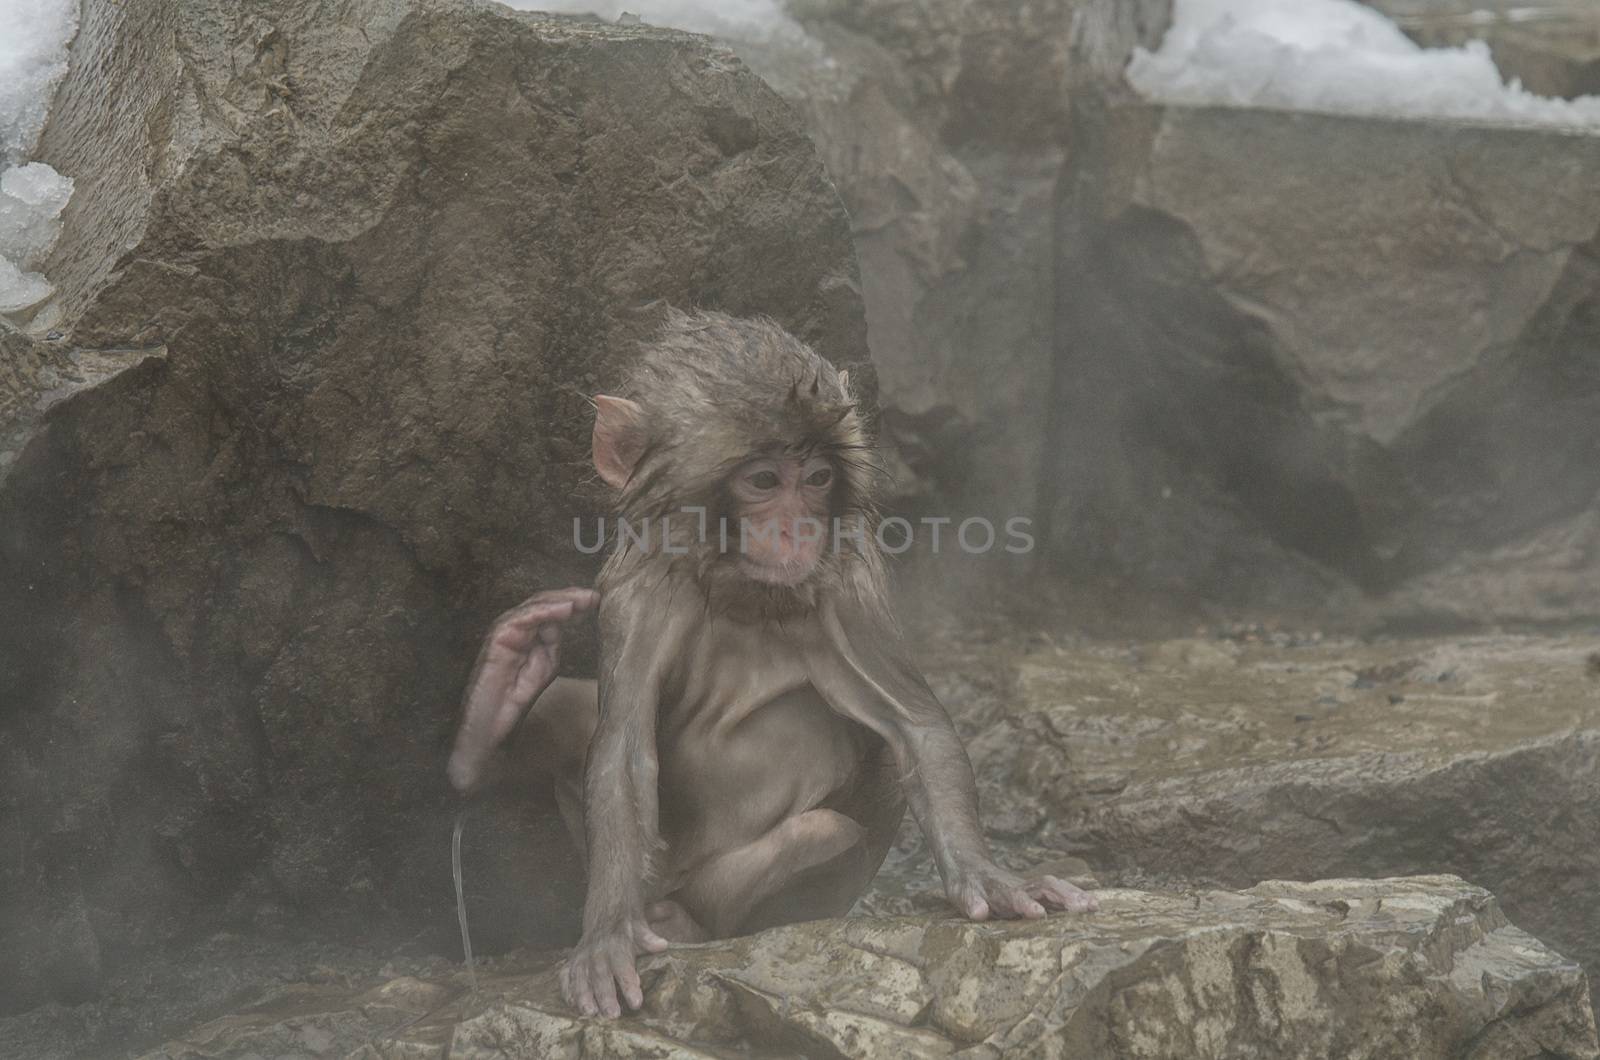 Japanese Snow monkey Macaque in hot spring Onsen Jigokudan Park, by chanwity